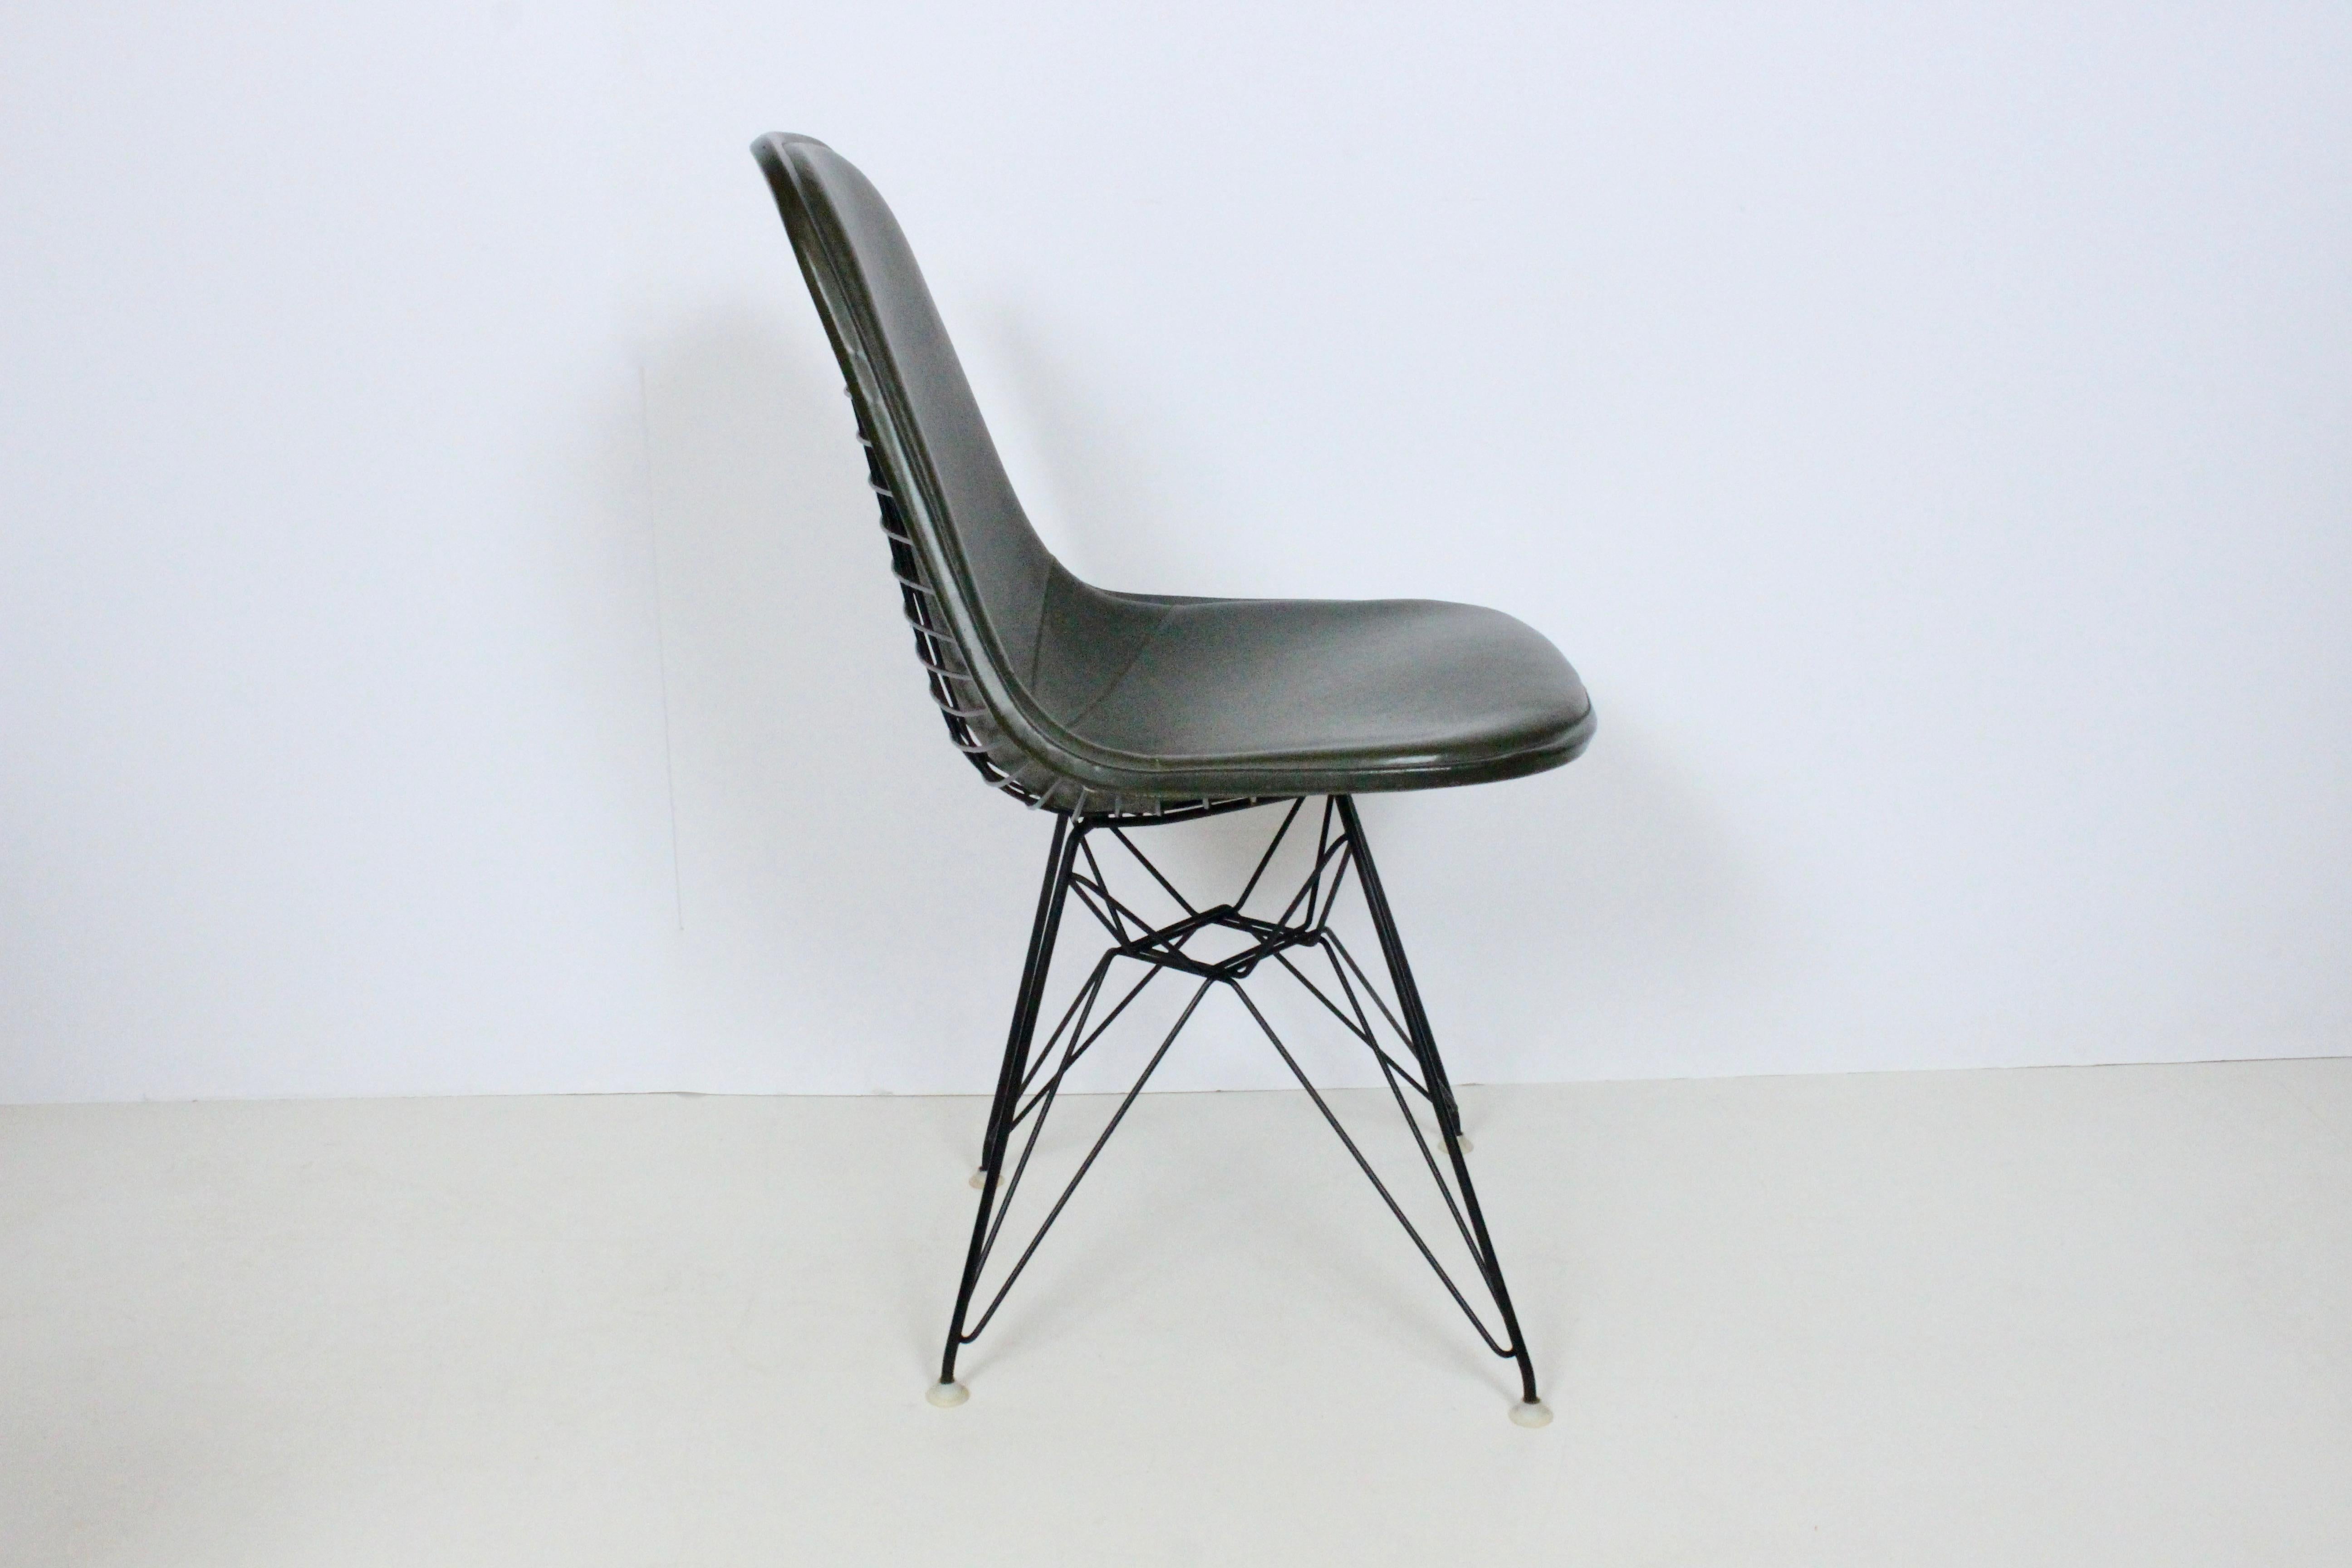 Charles & Ray Eames for Herman Miller DKR dark olive vinyl padded wire chair. Featuring a lightweight woven wire frame with softly padded rare Dark Olive Green (2 clip) molded vinyl cover, atop a Black enameled cross wire web 